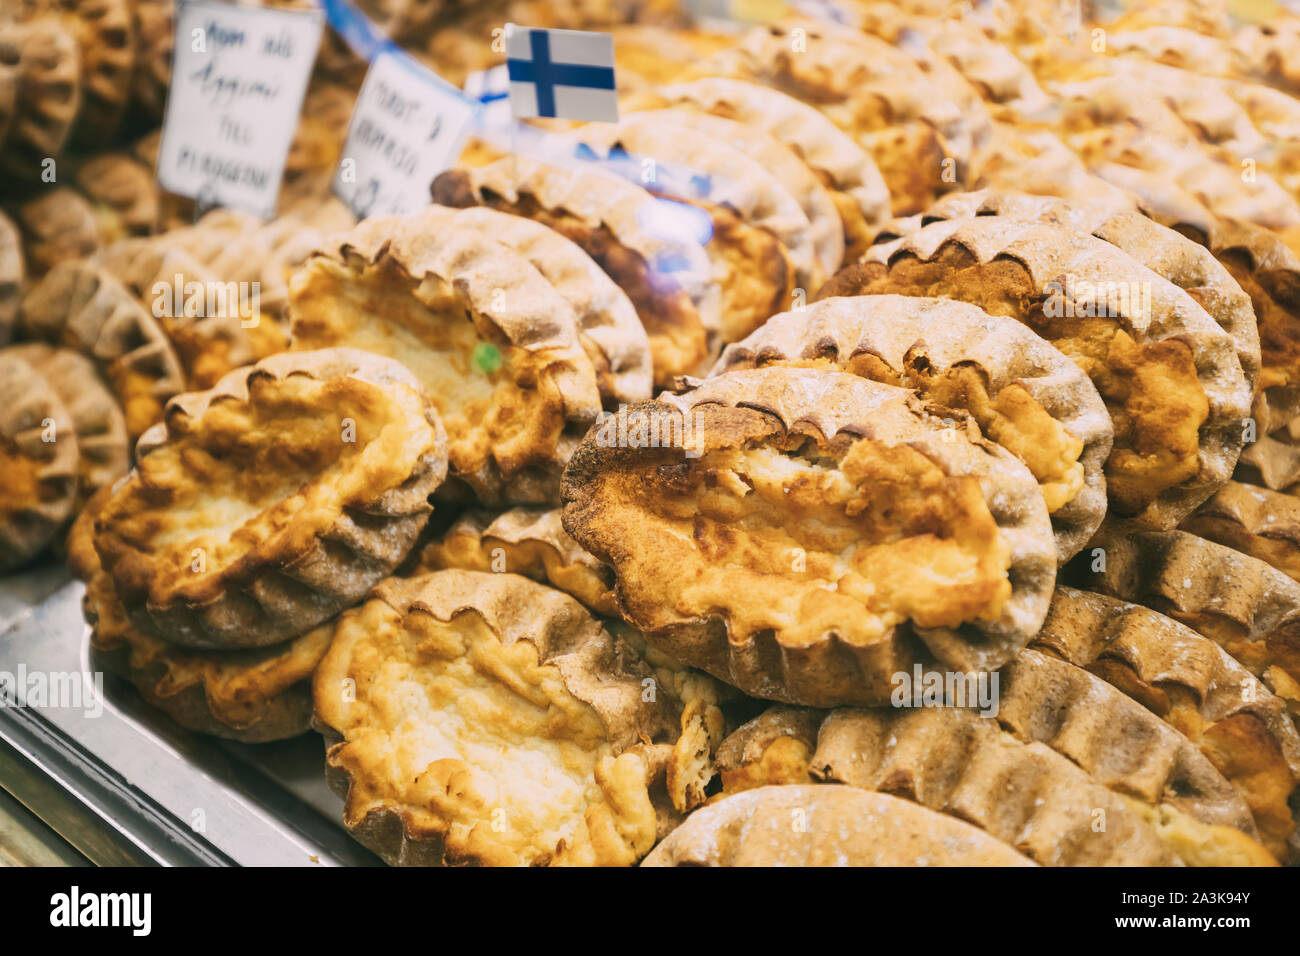 Finnish Traditional Pasties Or Pirogs - Karelian Pasties, Karelian Pies Or Karelian Pirogs From Region Of Karelia. Finland As Well As In Neighbouring Stock Photo